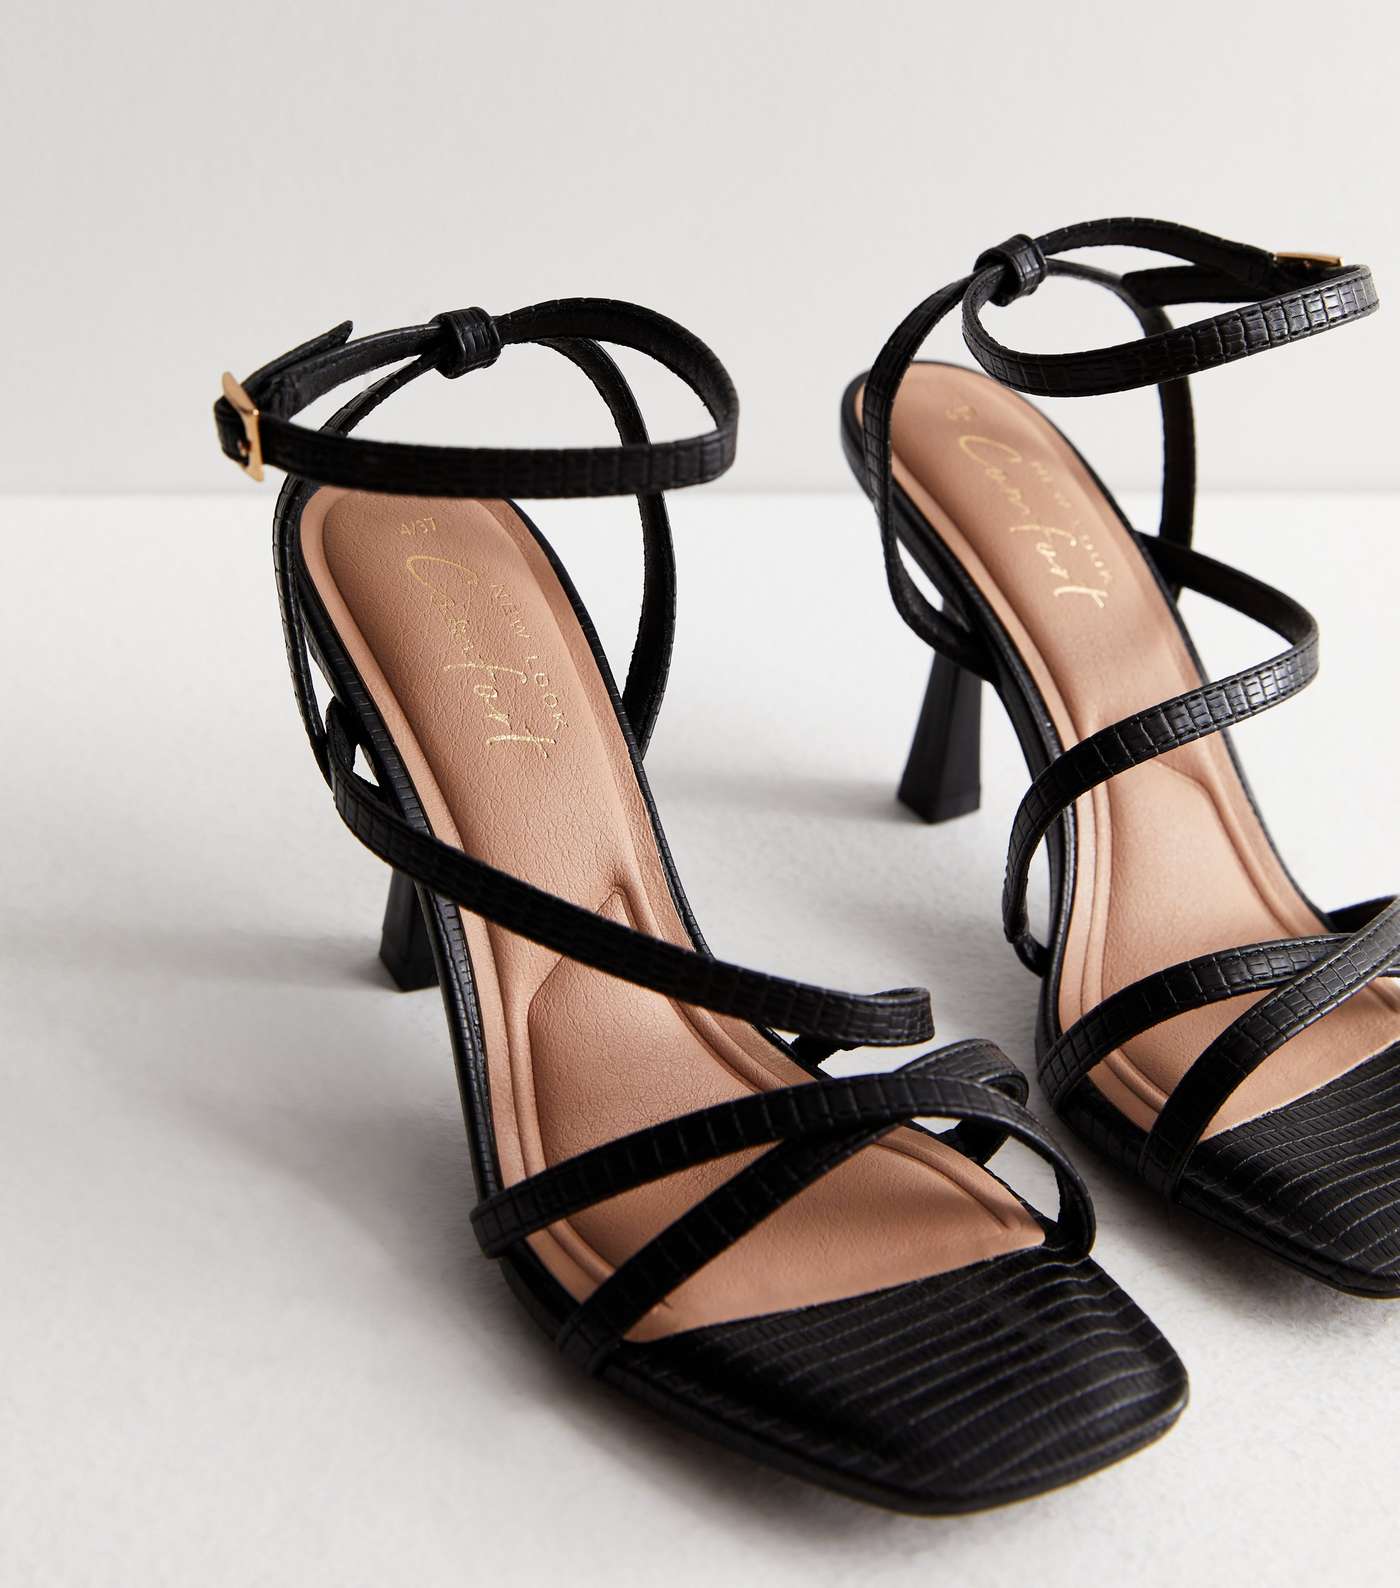 Black Leather-Look Strappy Stiletto Heel Sandals Image 6